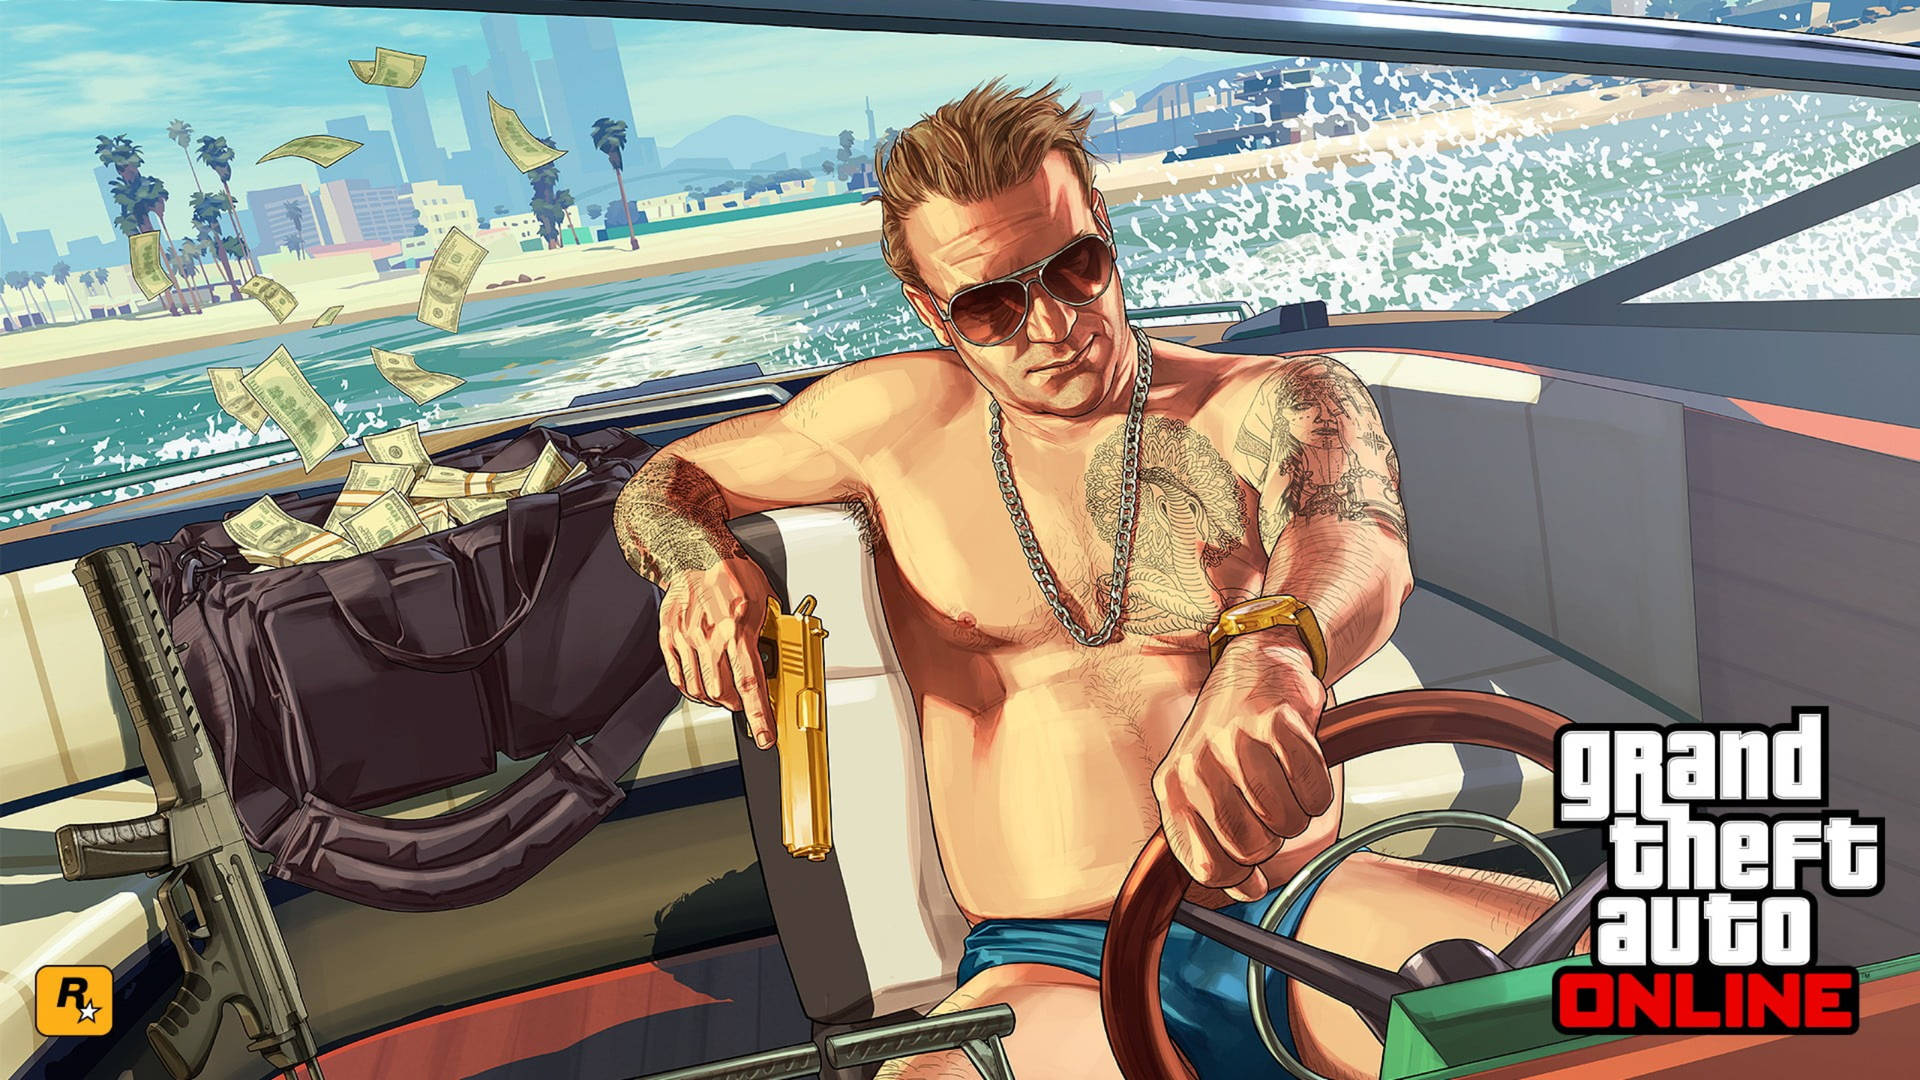 Grand Theft Auto Online On Boat Background